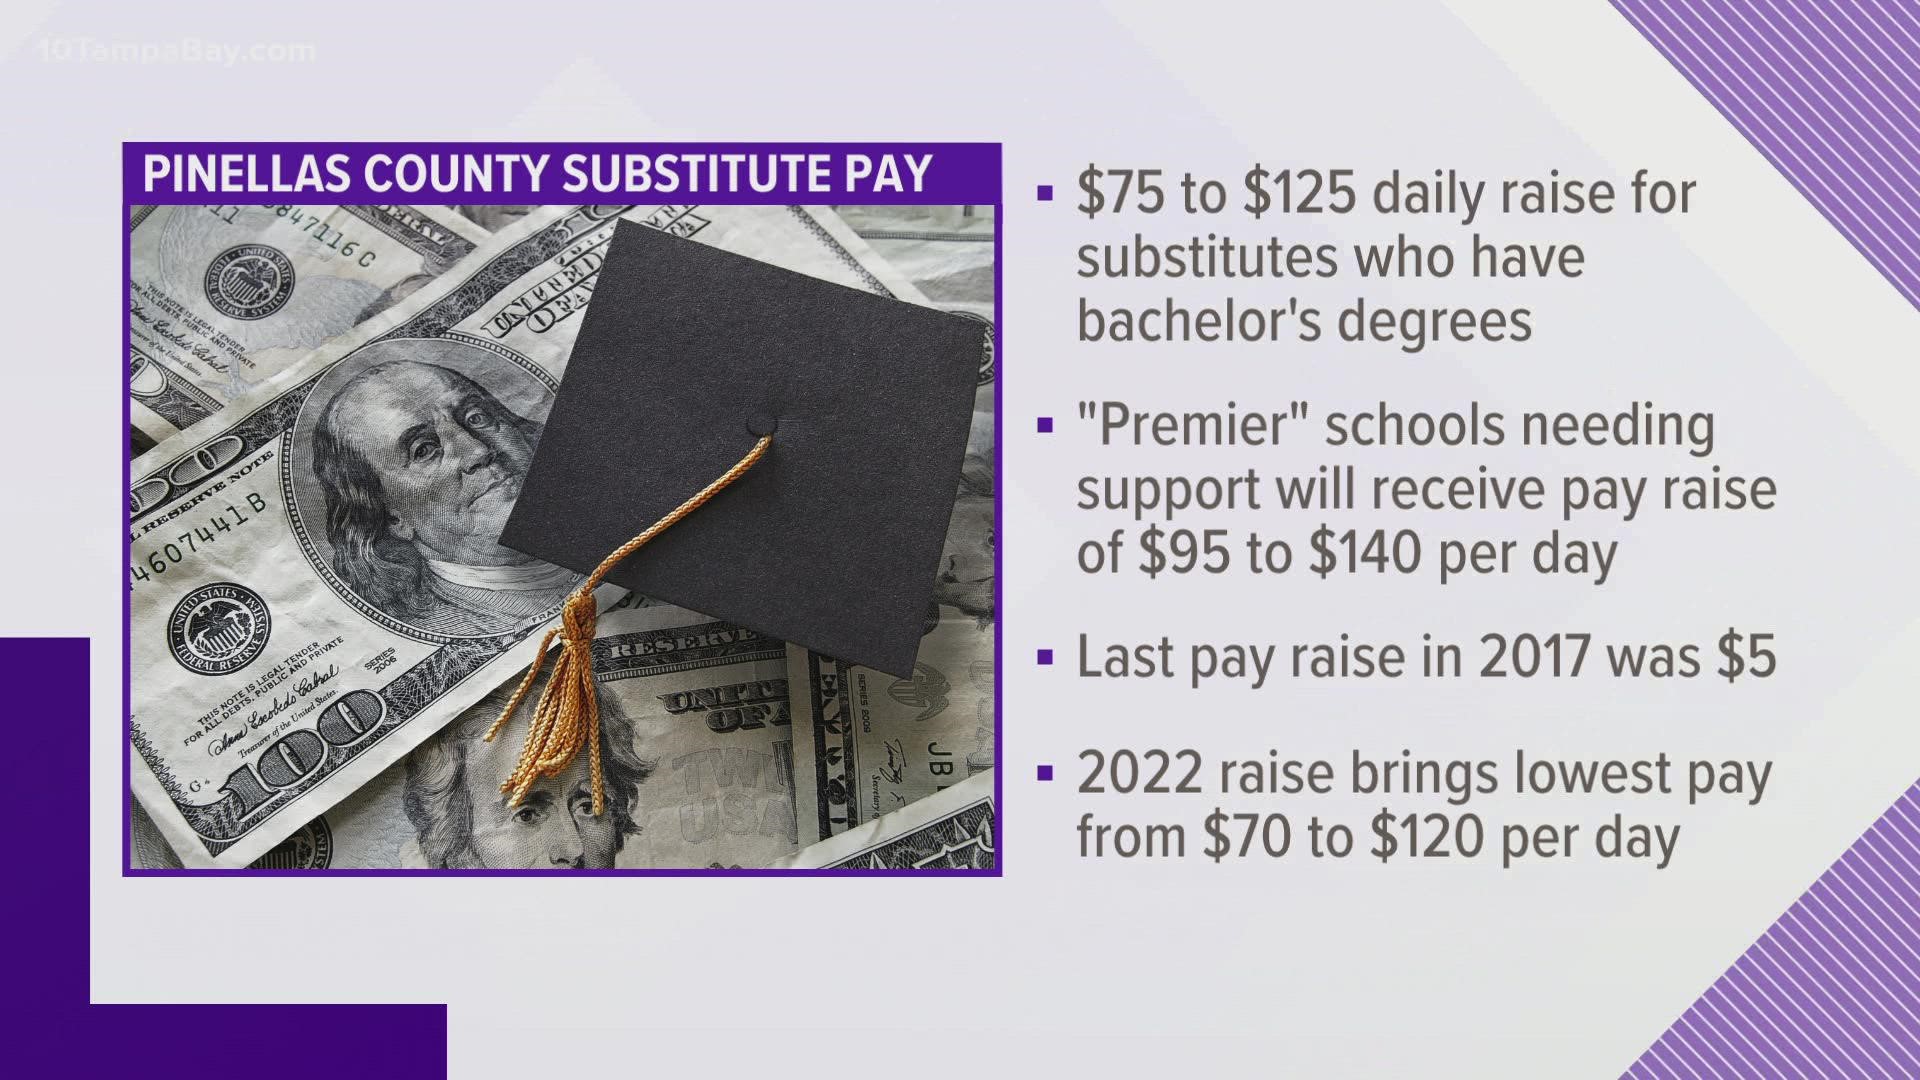 The increase could range from $75 to $125 for substitutes who have a bachelor's degree.